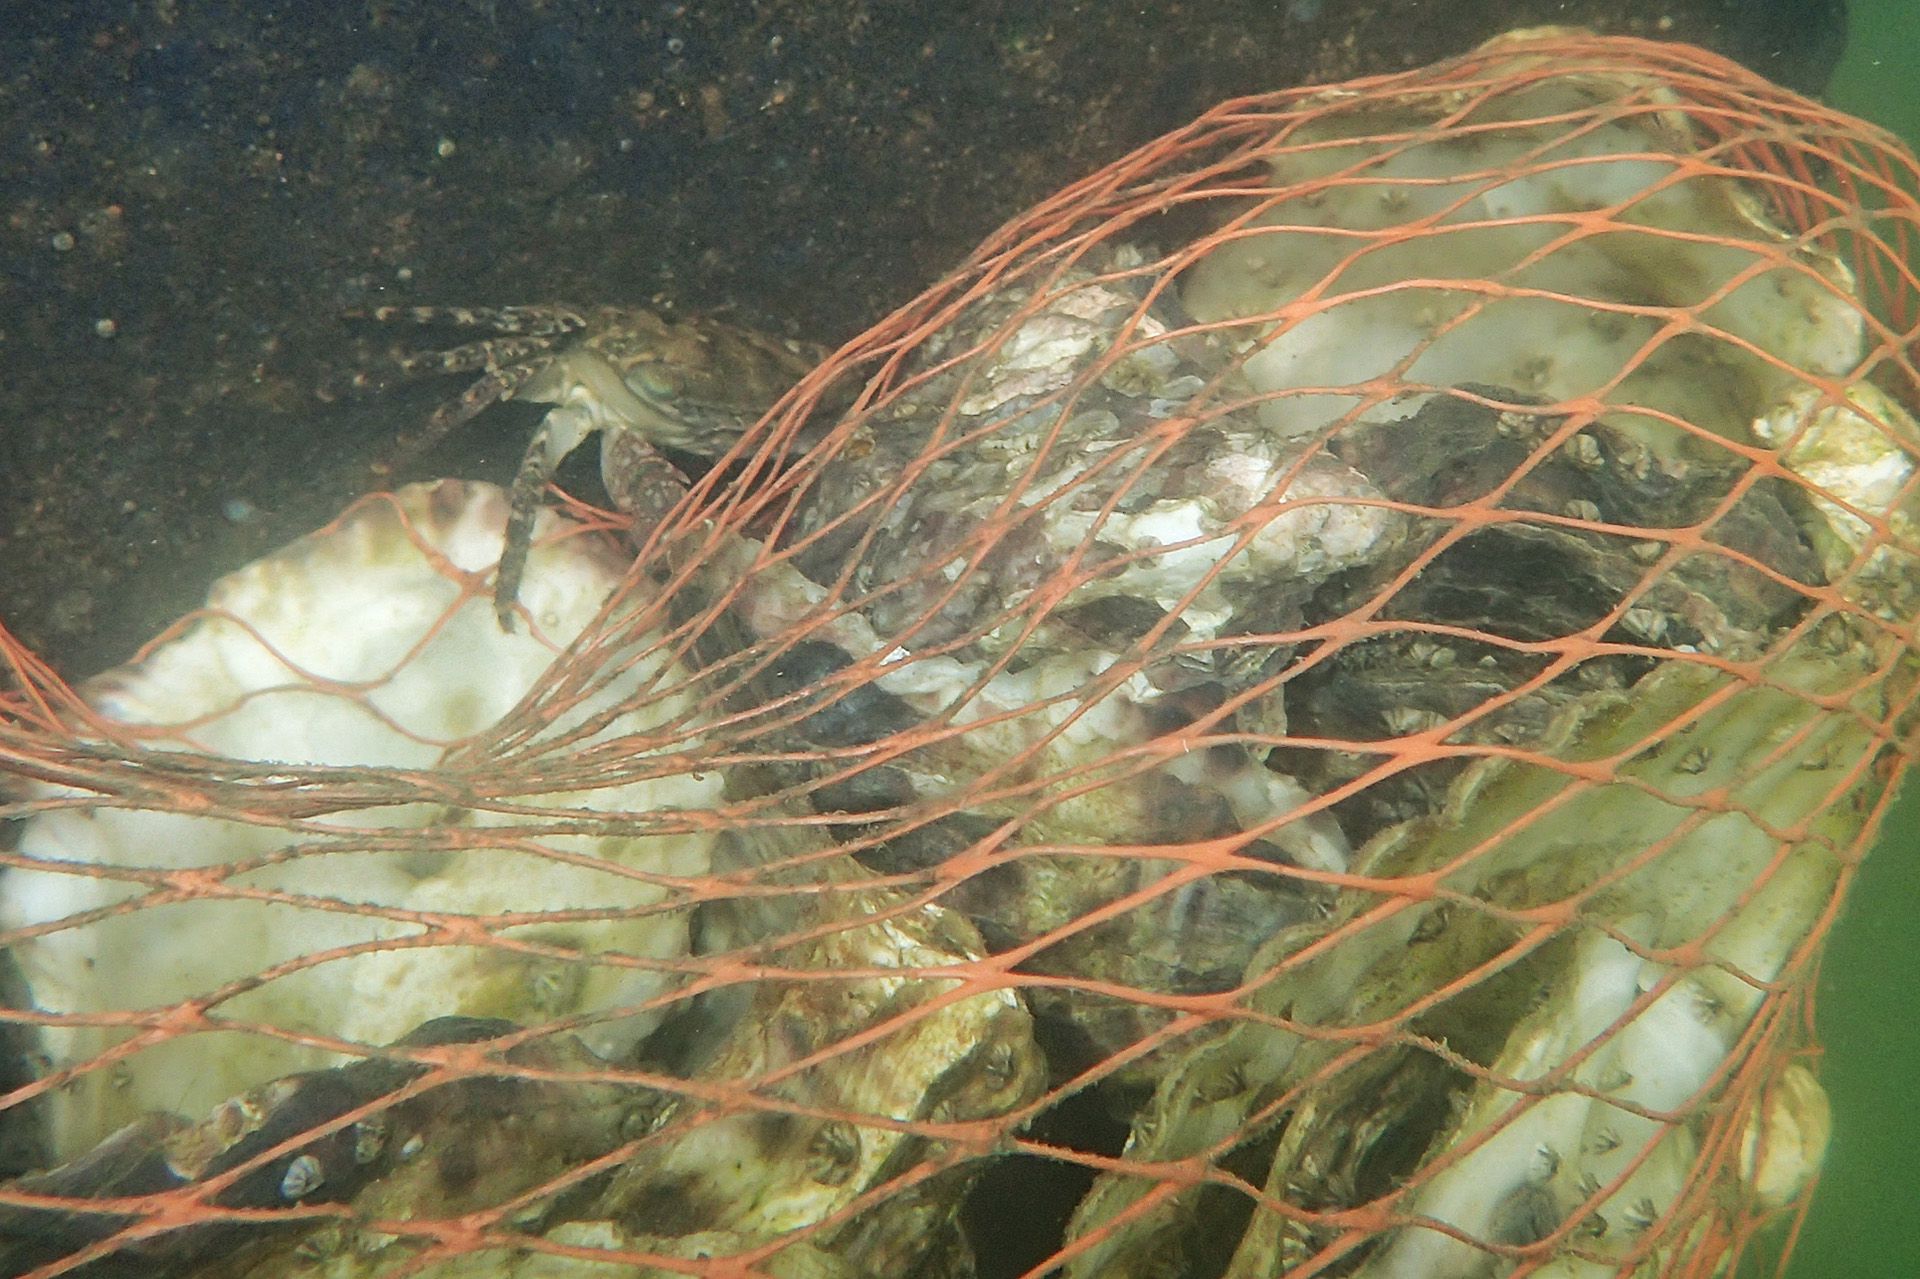 An unidentified crab crawling on recycled oysters which have been repurposed to become a reef on Jan 24.